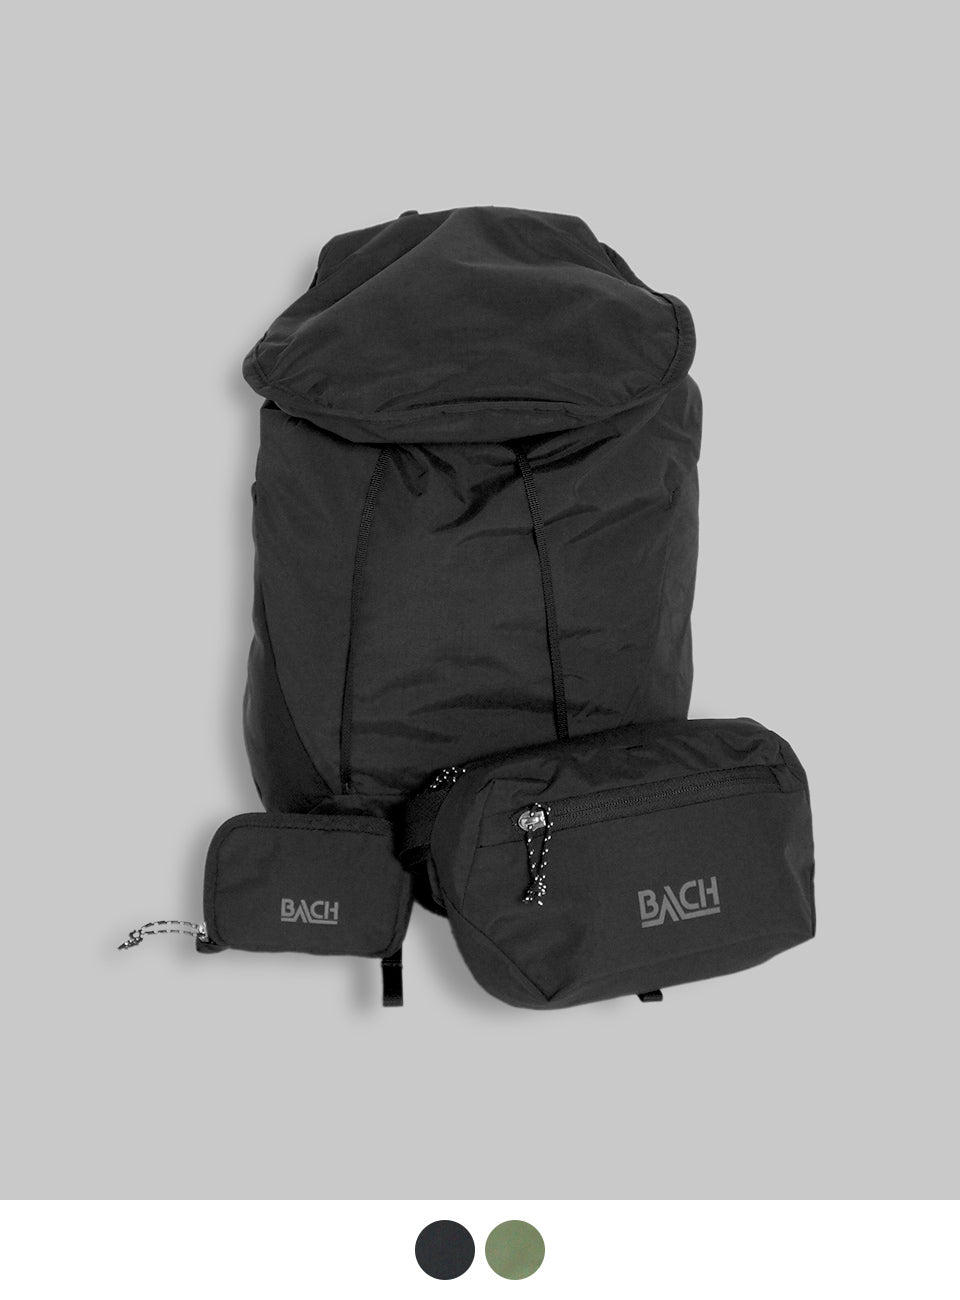 BACH バッハ 【3点セット】ITSY BITSY FAMILY BACKPACK SET, WALLET and POUCH_3pcs  バックパック リュック 20L ショルダーバッグ ポーチ 財布 ウォレット   24S-420986SET【送料無料】【クーポン対象外】